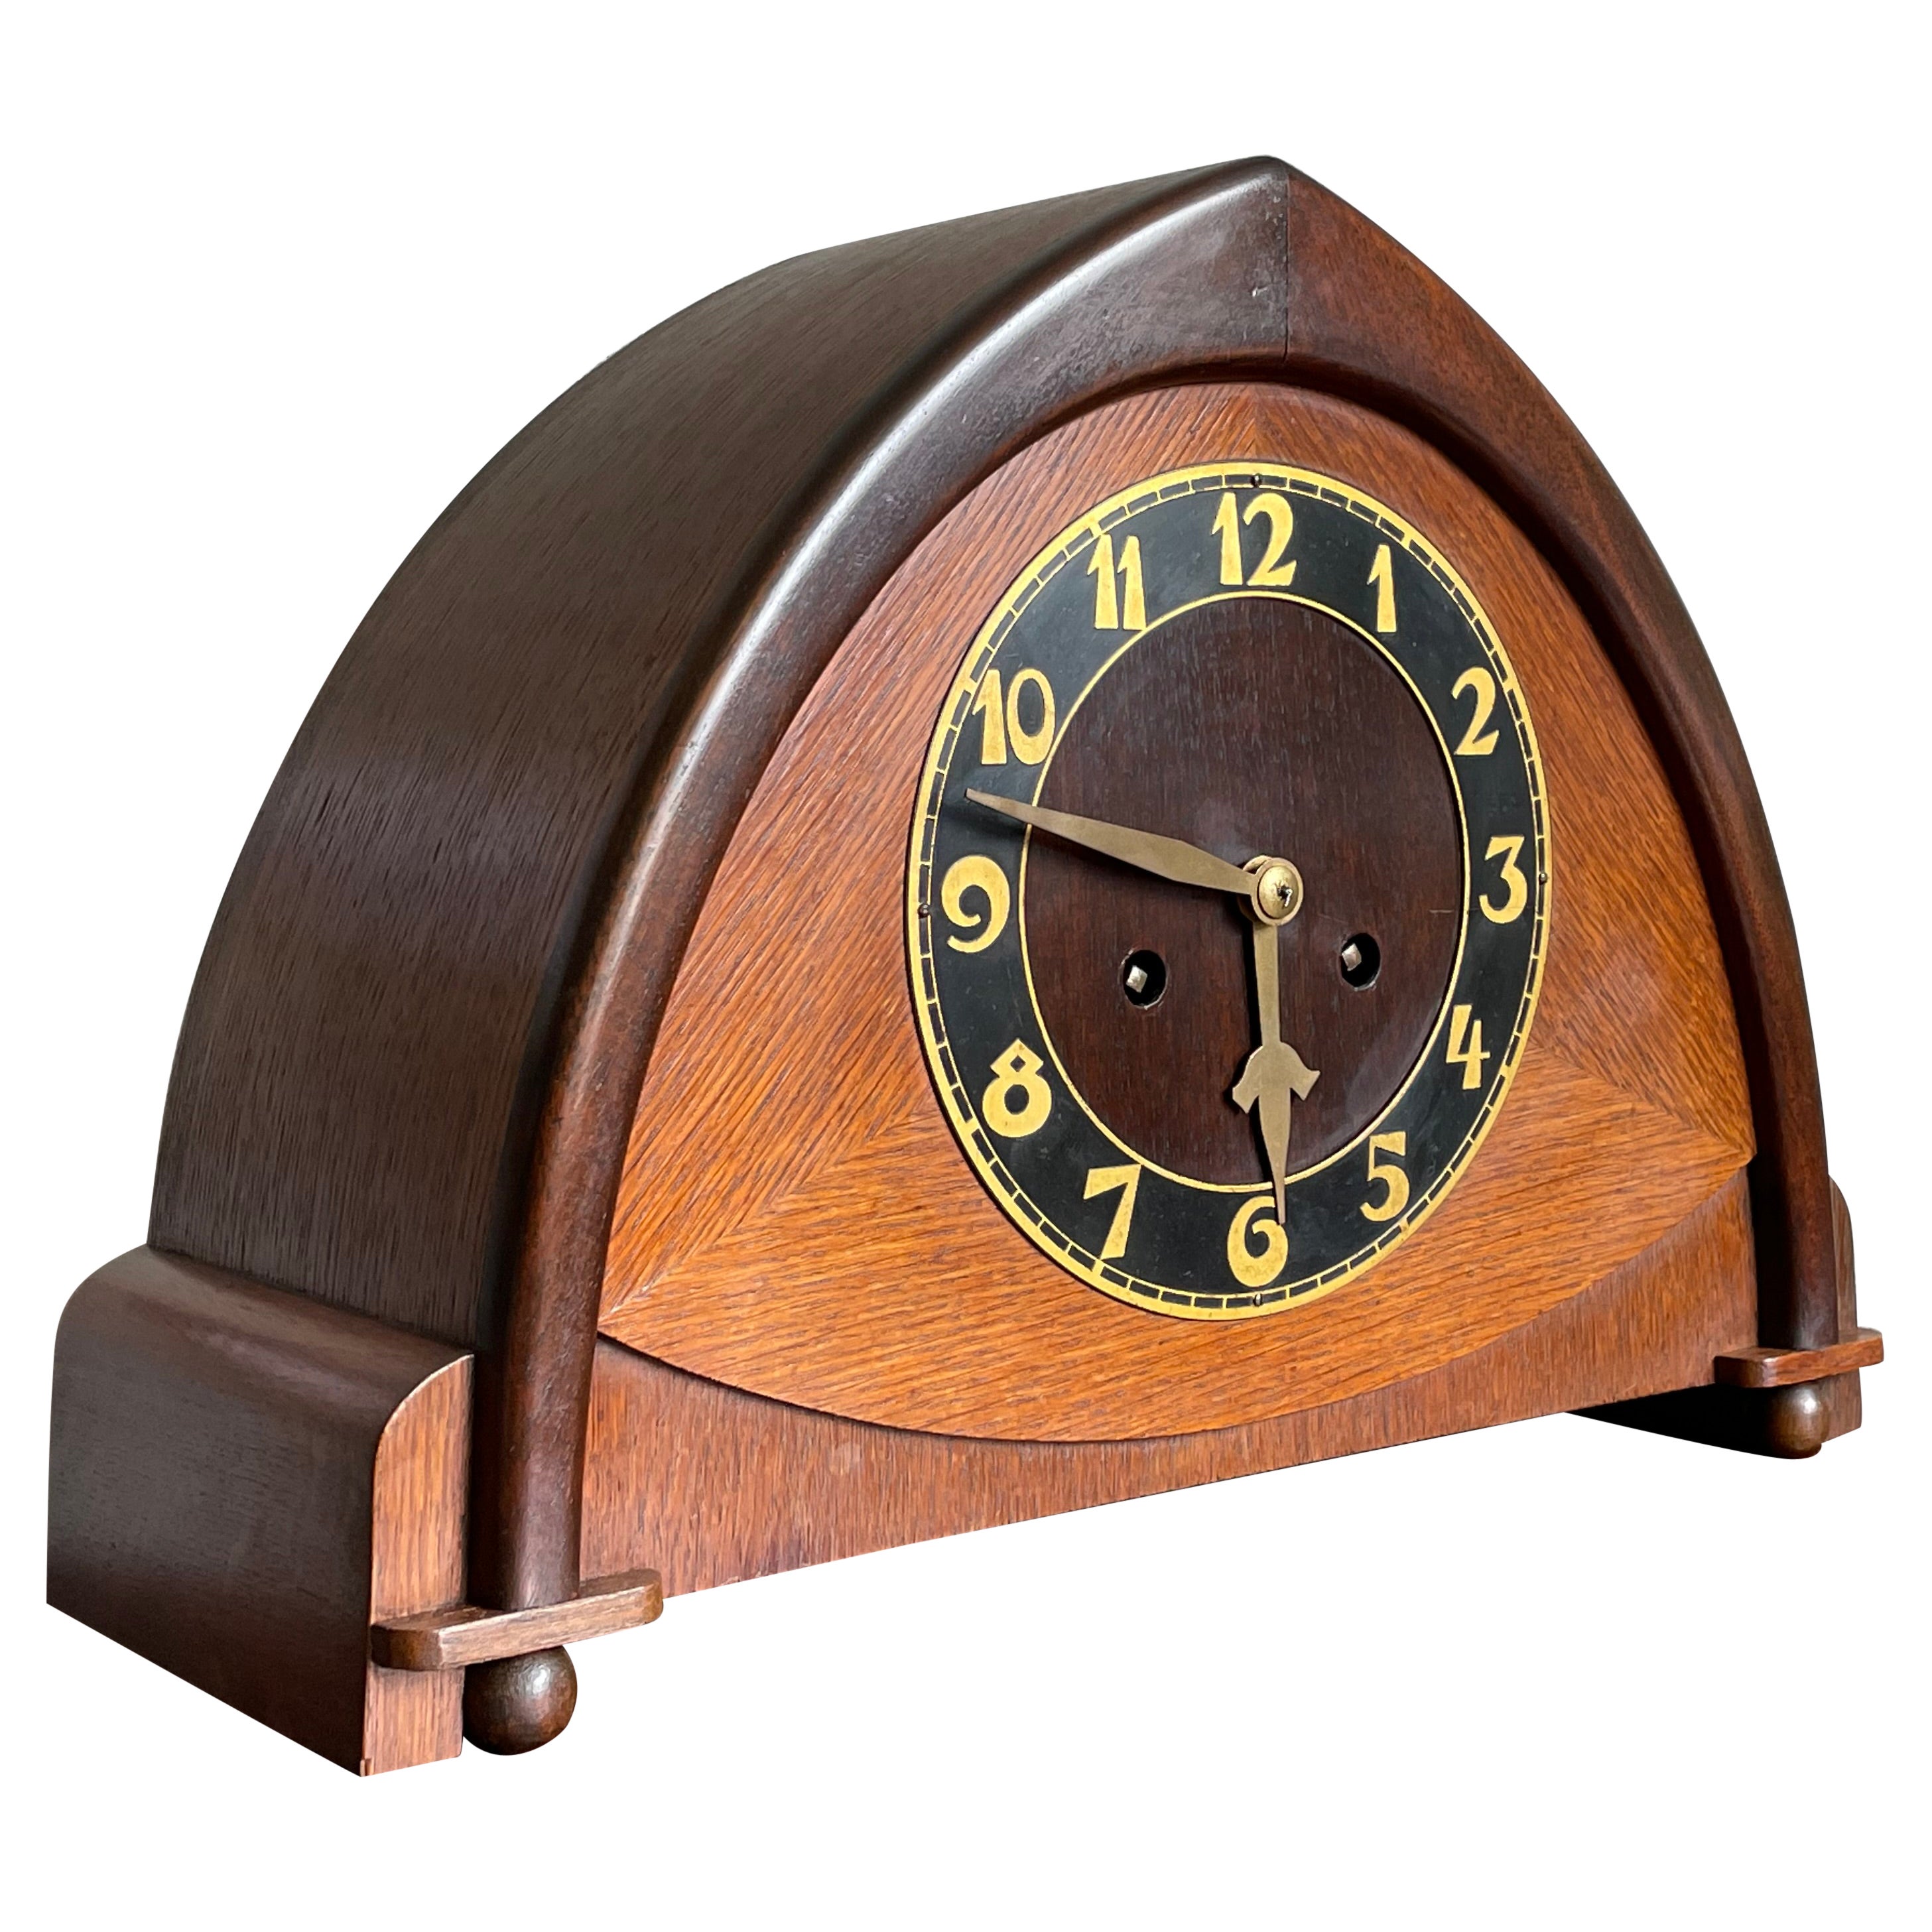 Dutch Arts & Crafts Wooden Mantle or Desk Clock w. Stunning Brass Dial Face 1915 For Sale